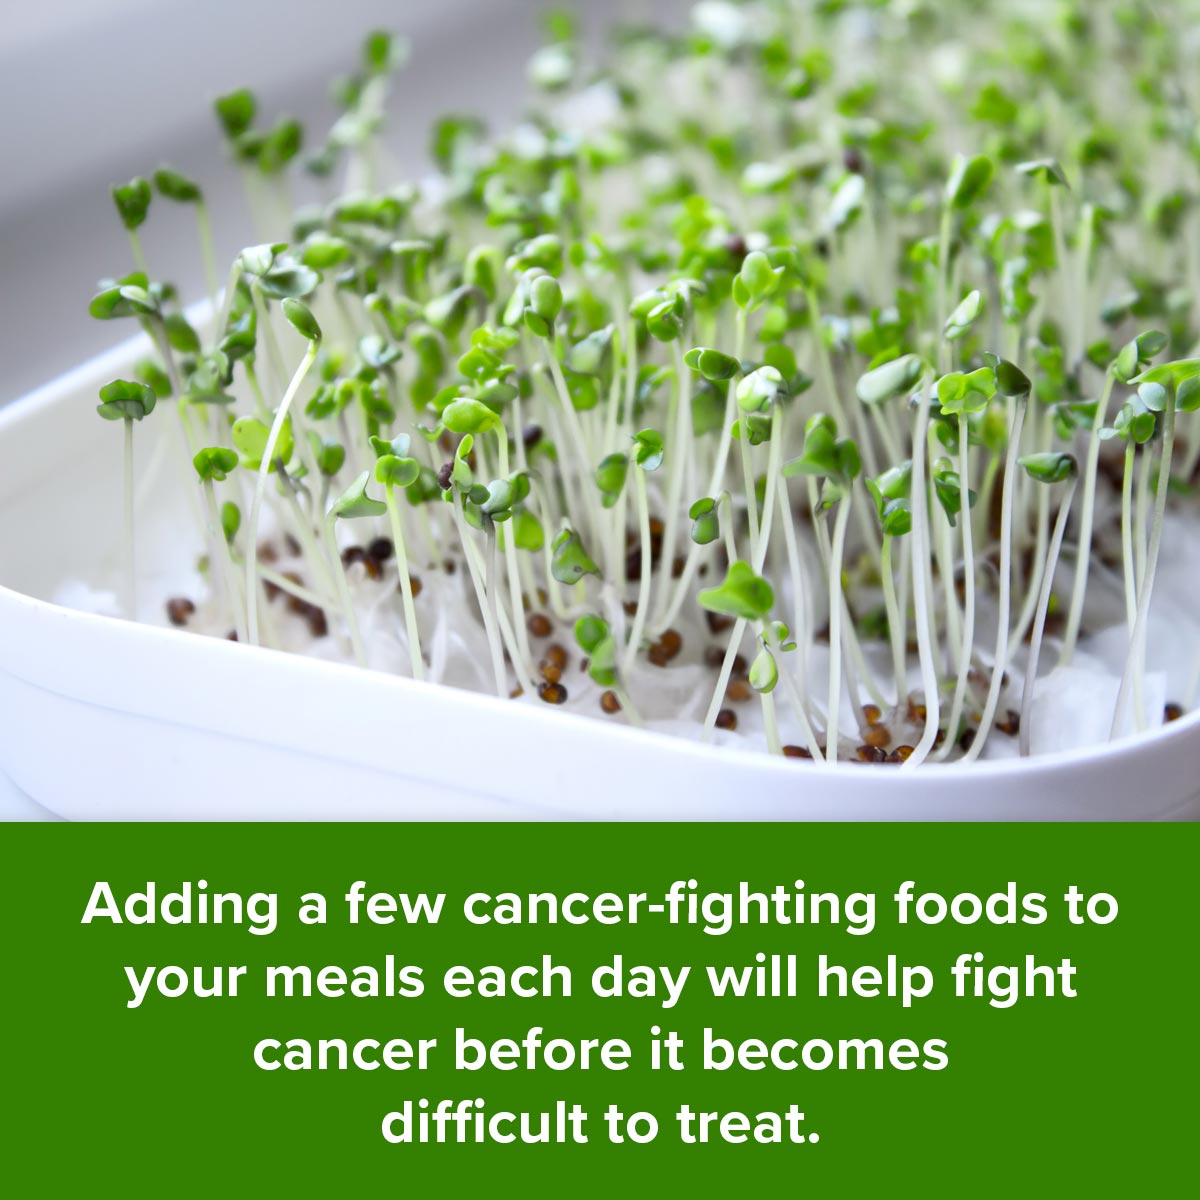 Adding a few cancer-fighting foods to your meals each day will help fight cancer before it becomes difficult to treat.